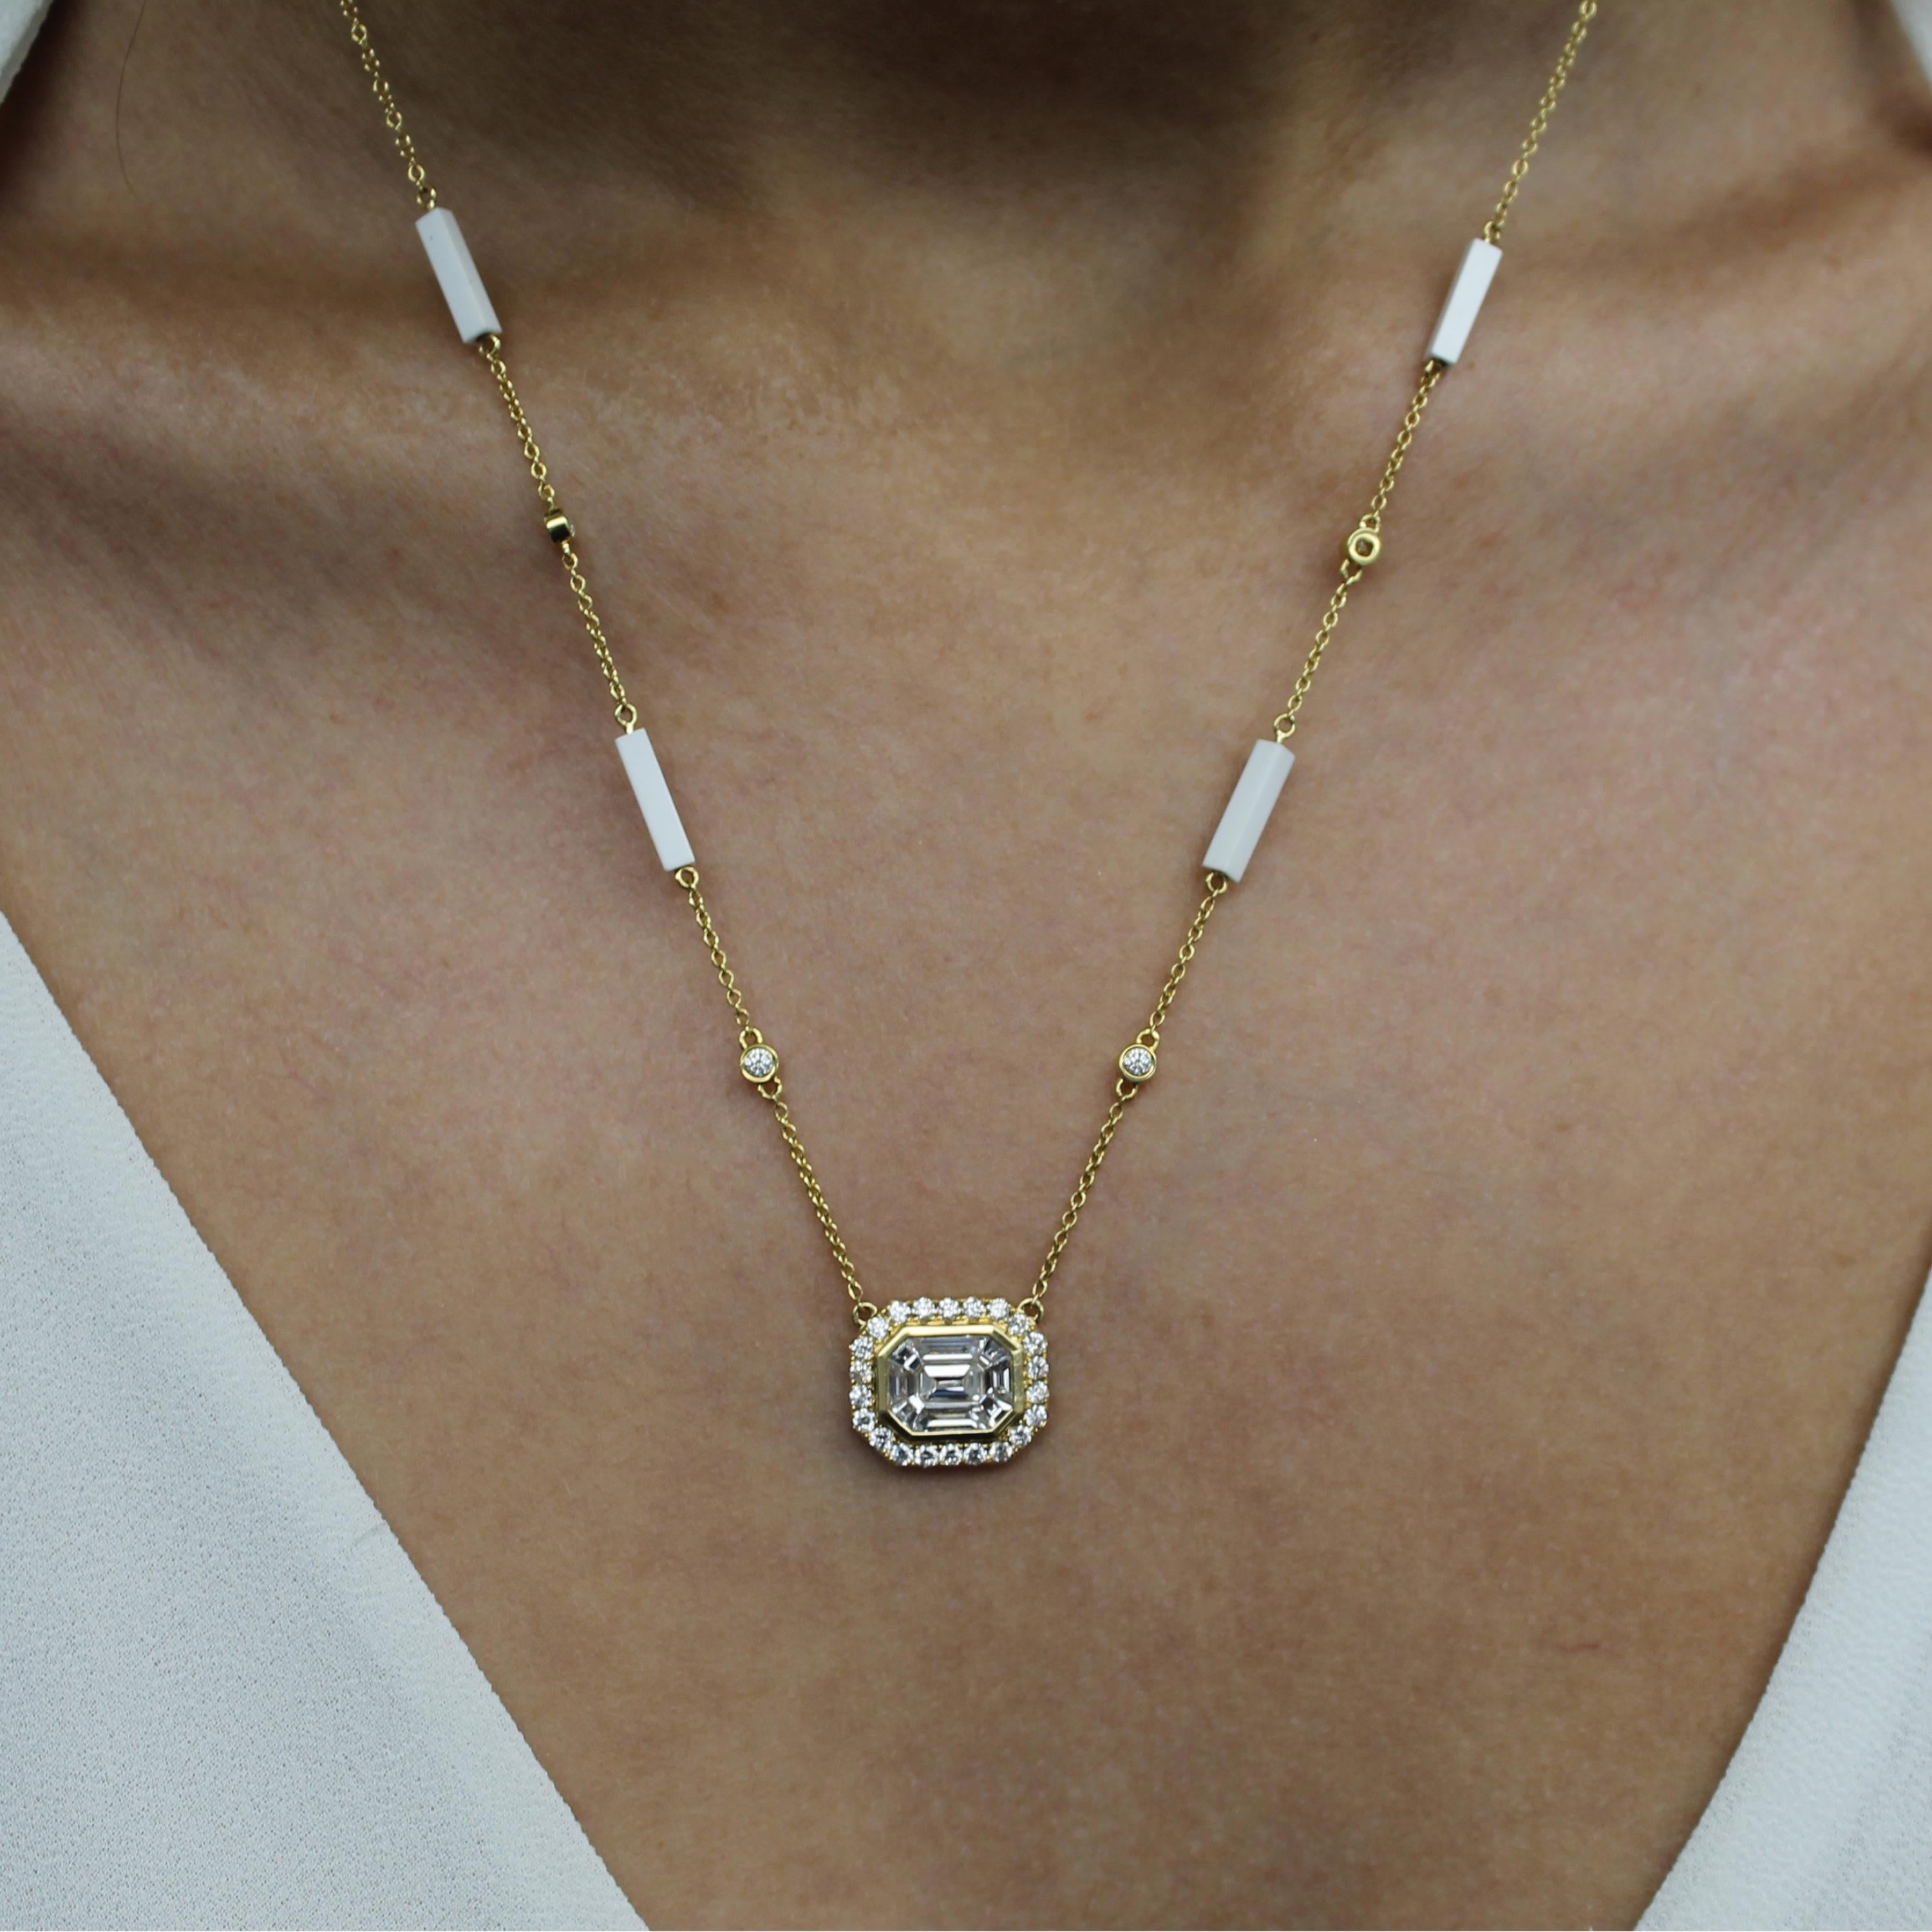 Mykonos Necklace featuring an Invisible-Set Emerald Diamond Center made up of Baguettes, framed in 18K yellow gold and Diamond Halo. 18-inch 18K Diamond and White Agate Stattion Chain, with adjuster at 16-inches. The Mykonos collection from Doves by